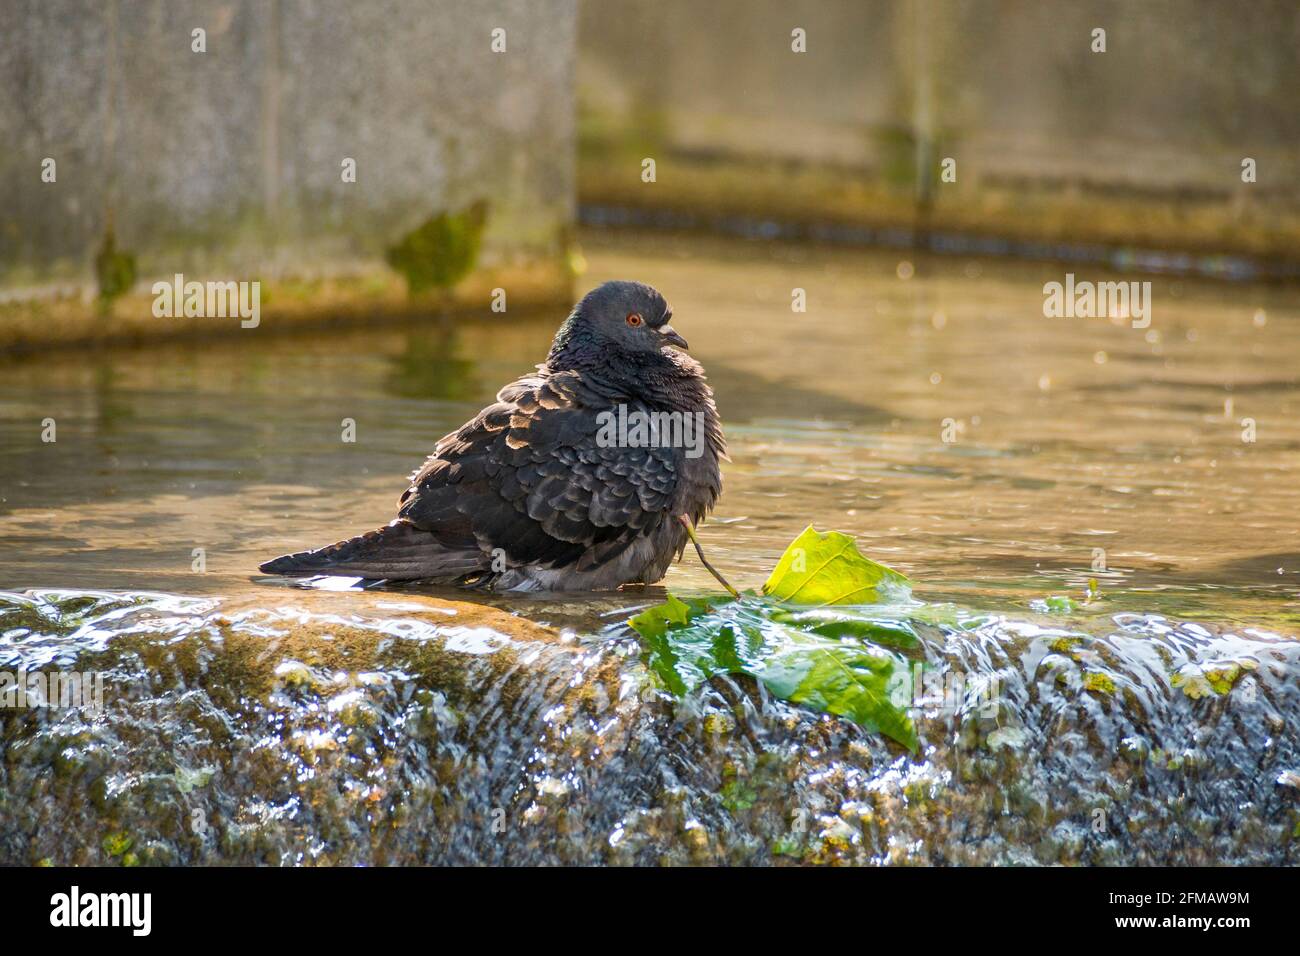 Germany, Baden-Wuerttemberg, pigeon, domestic pigeon bathes, plumage cleaning in the water of a fountain bowl Stock Photo